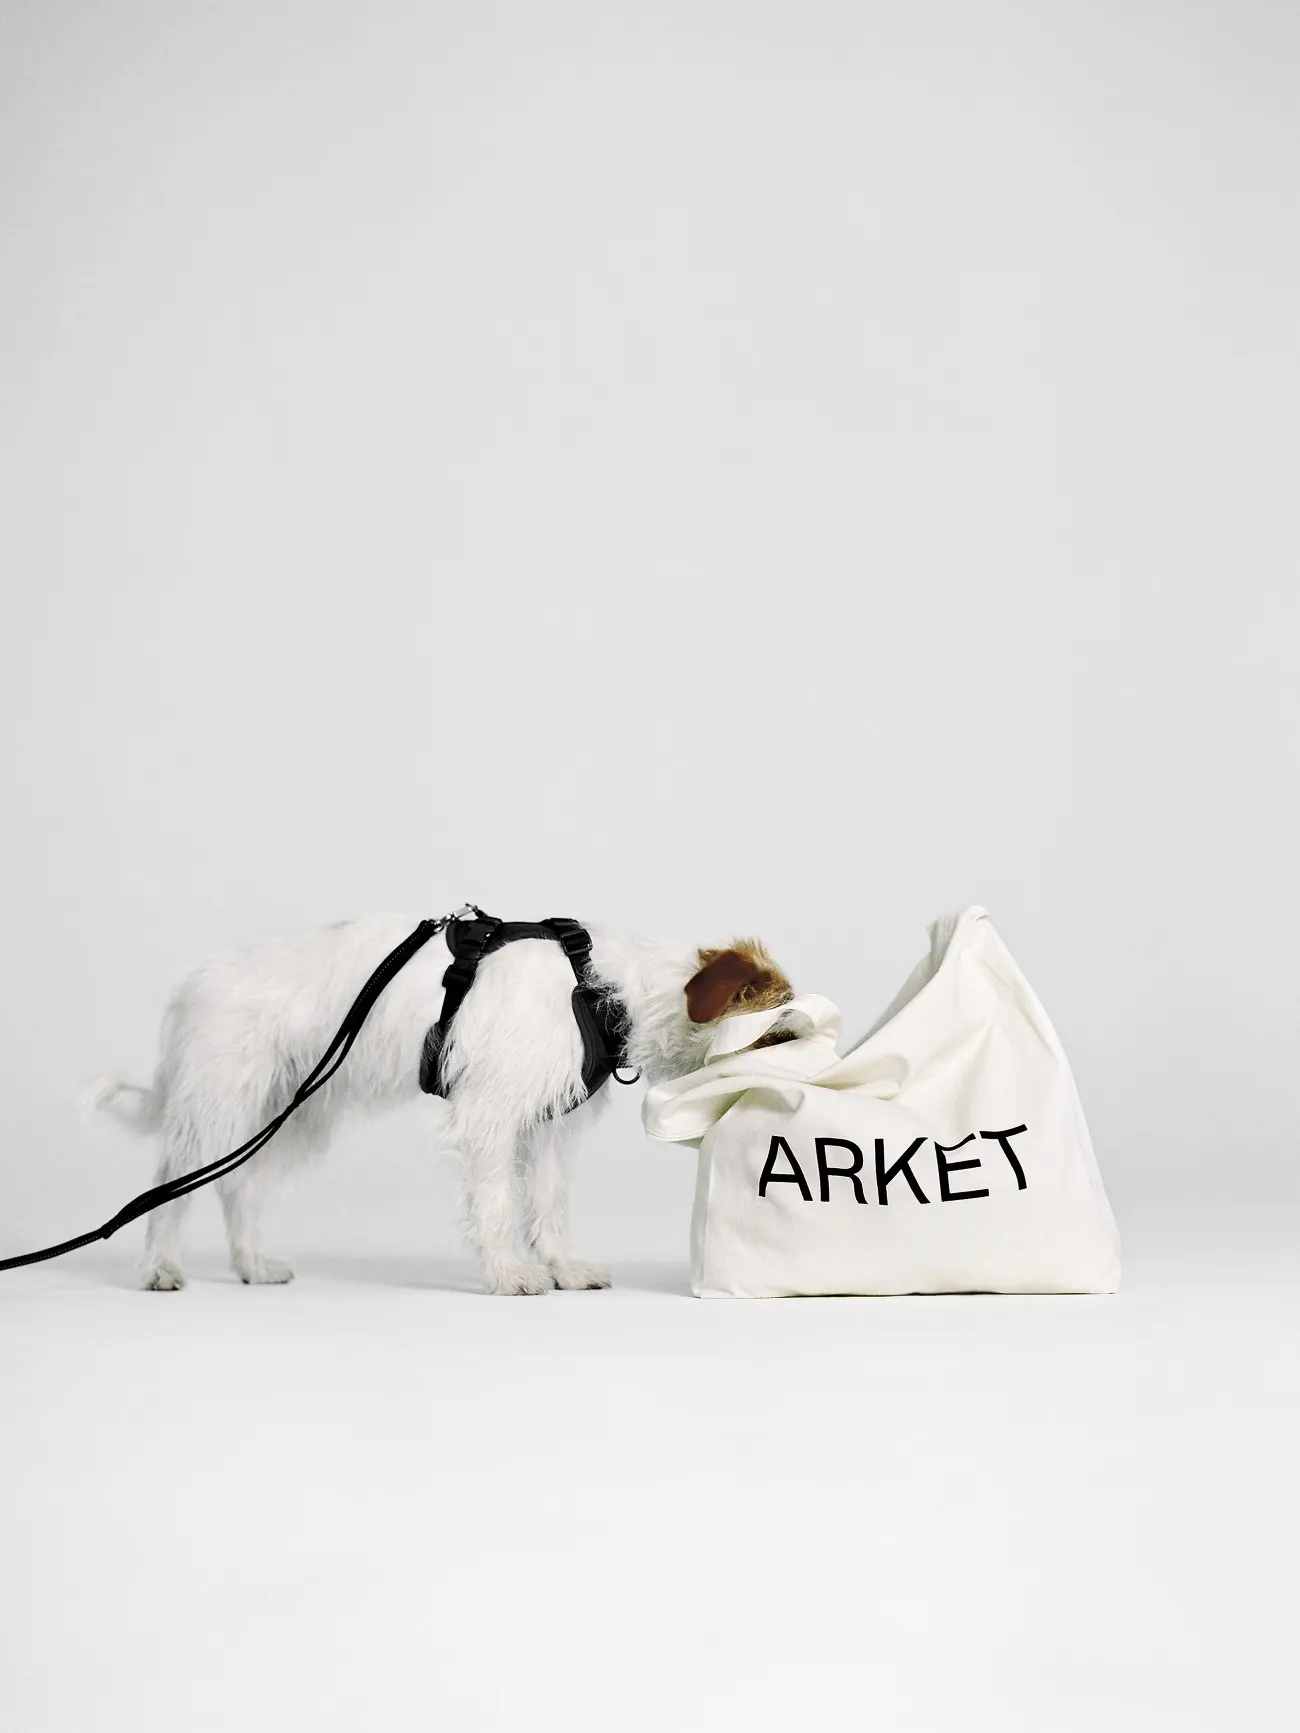 ARKET for Dogs